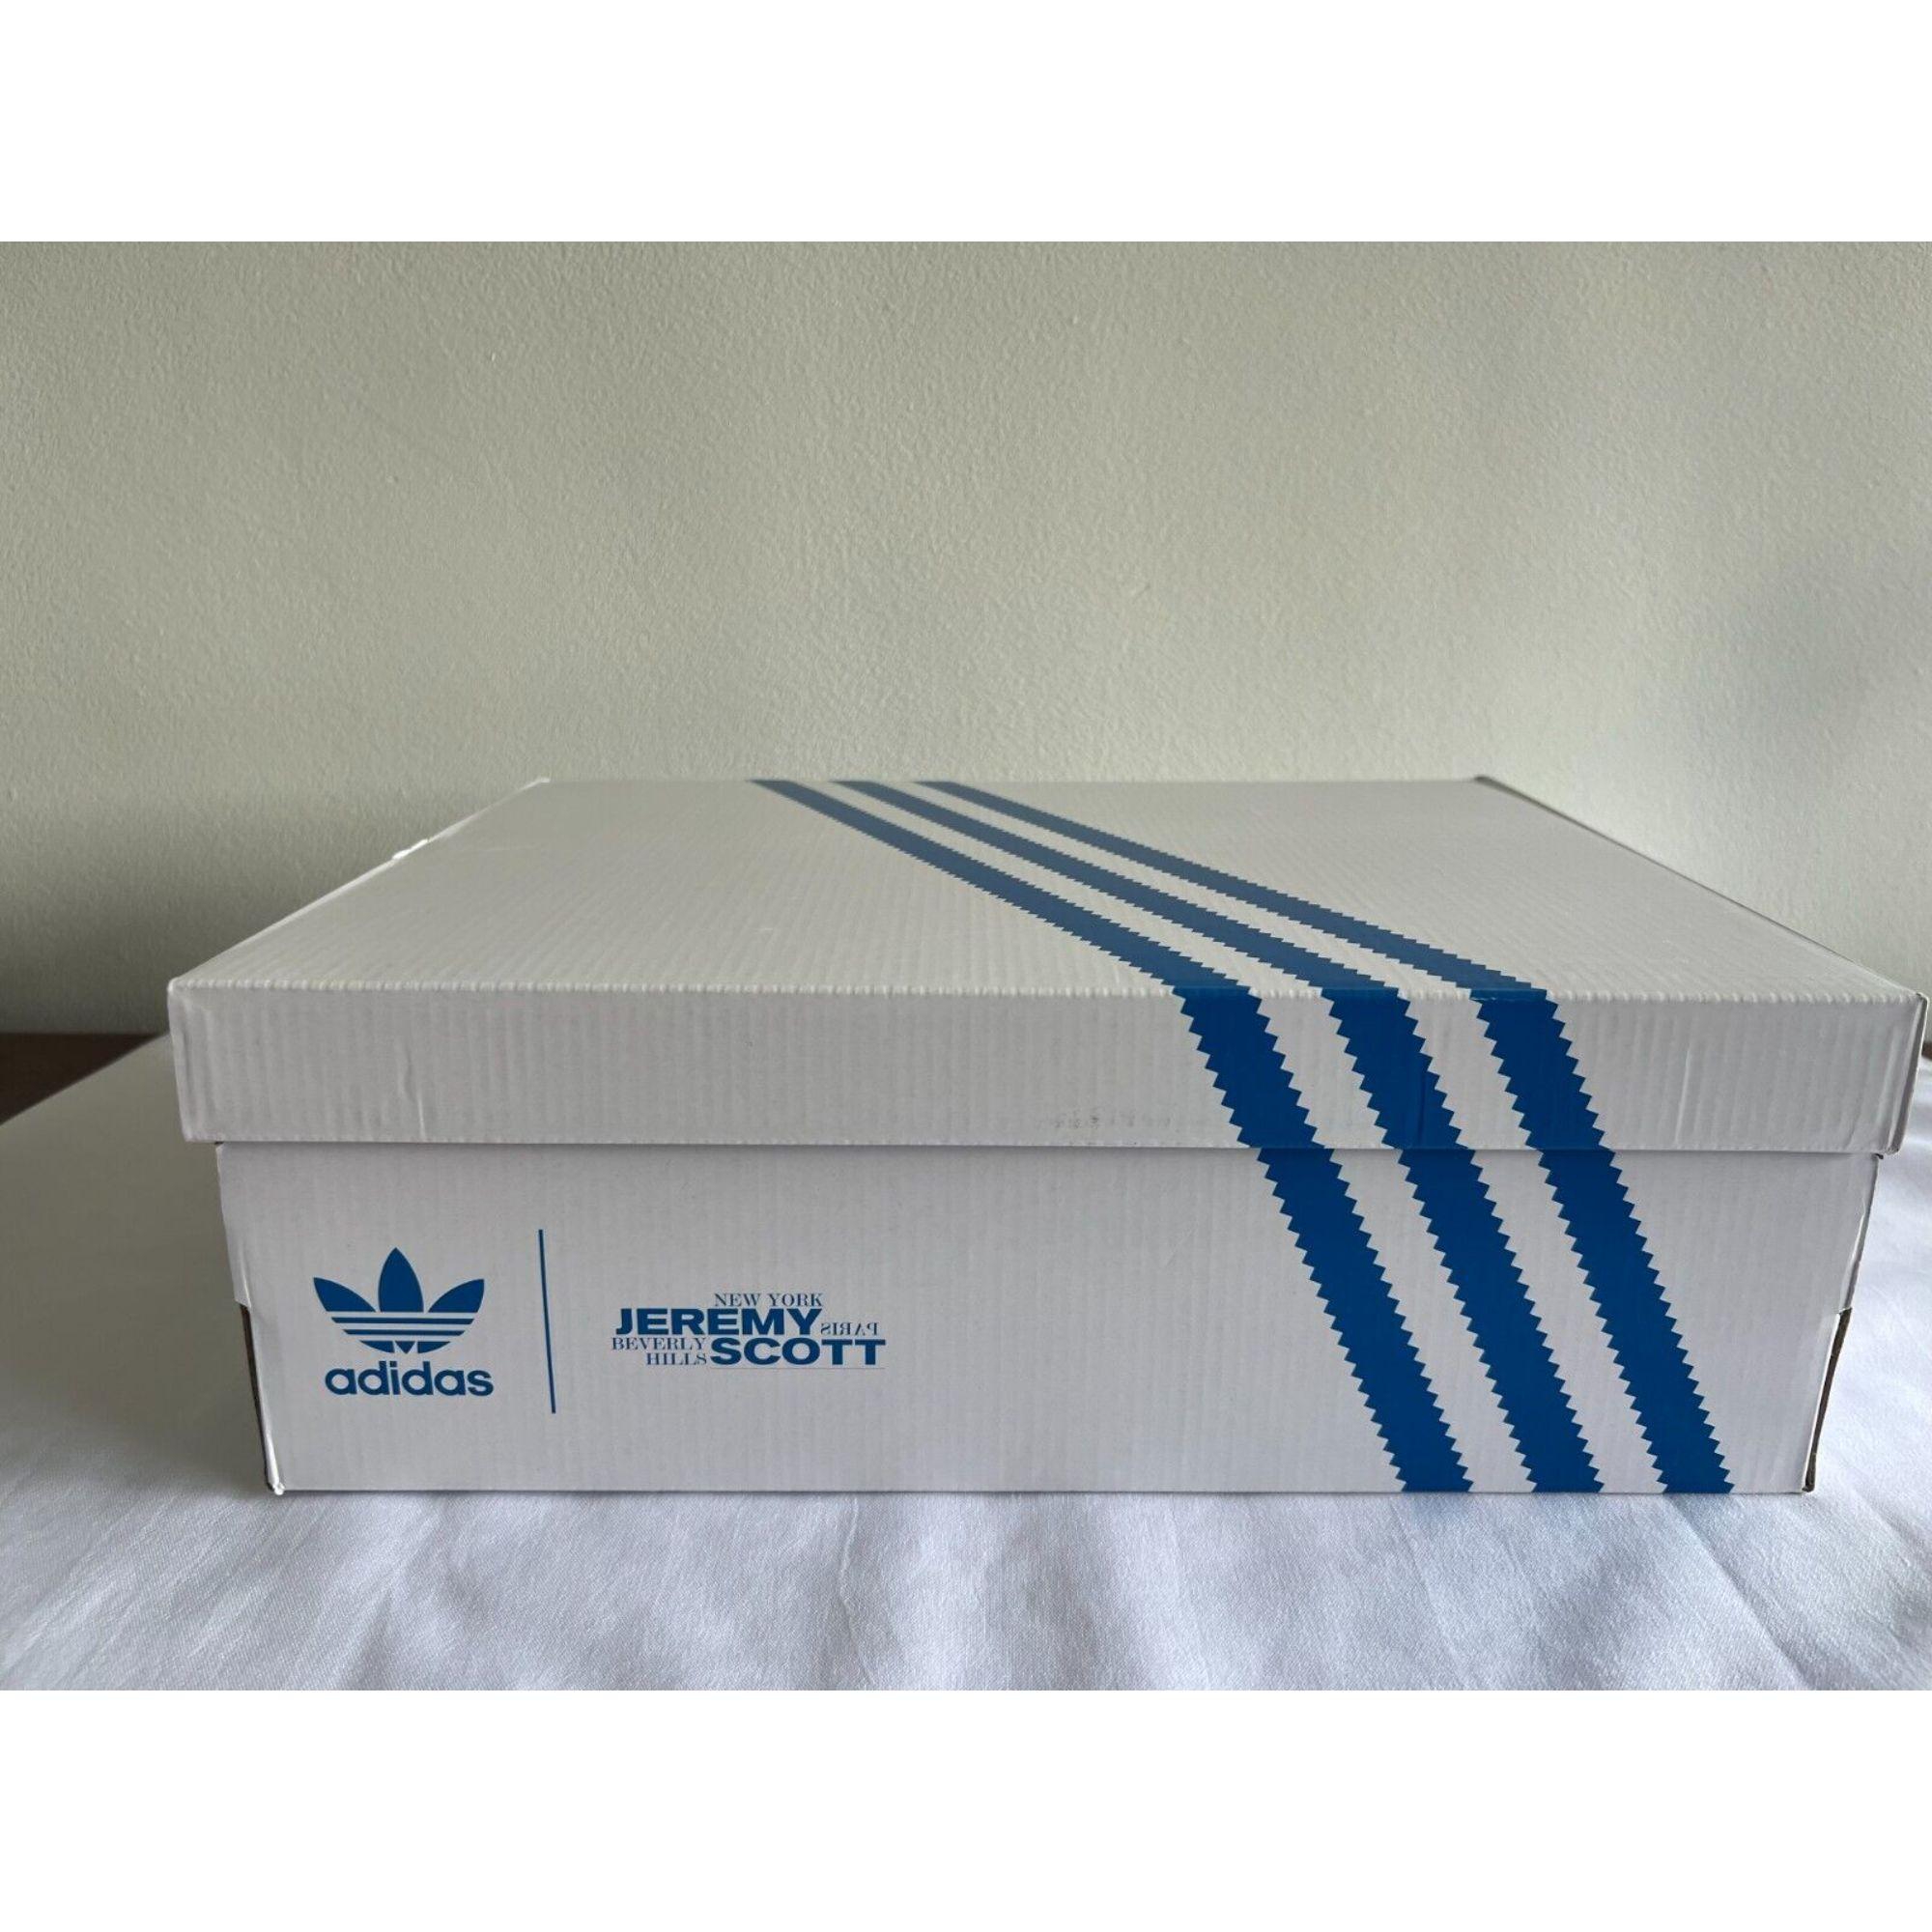 Adidas Originals ObyO Wings 4.0 Core Cloud Sneakers by Jeremy Scott, Size 12 For Sale 6